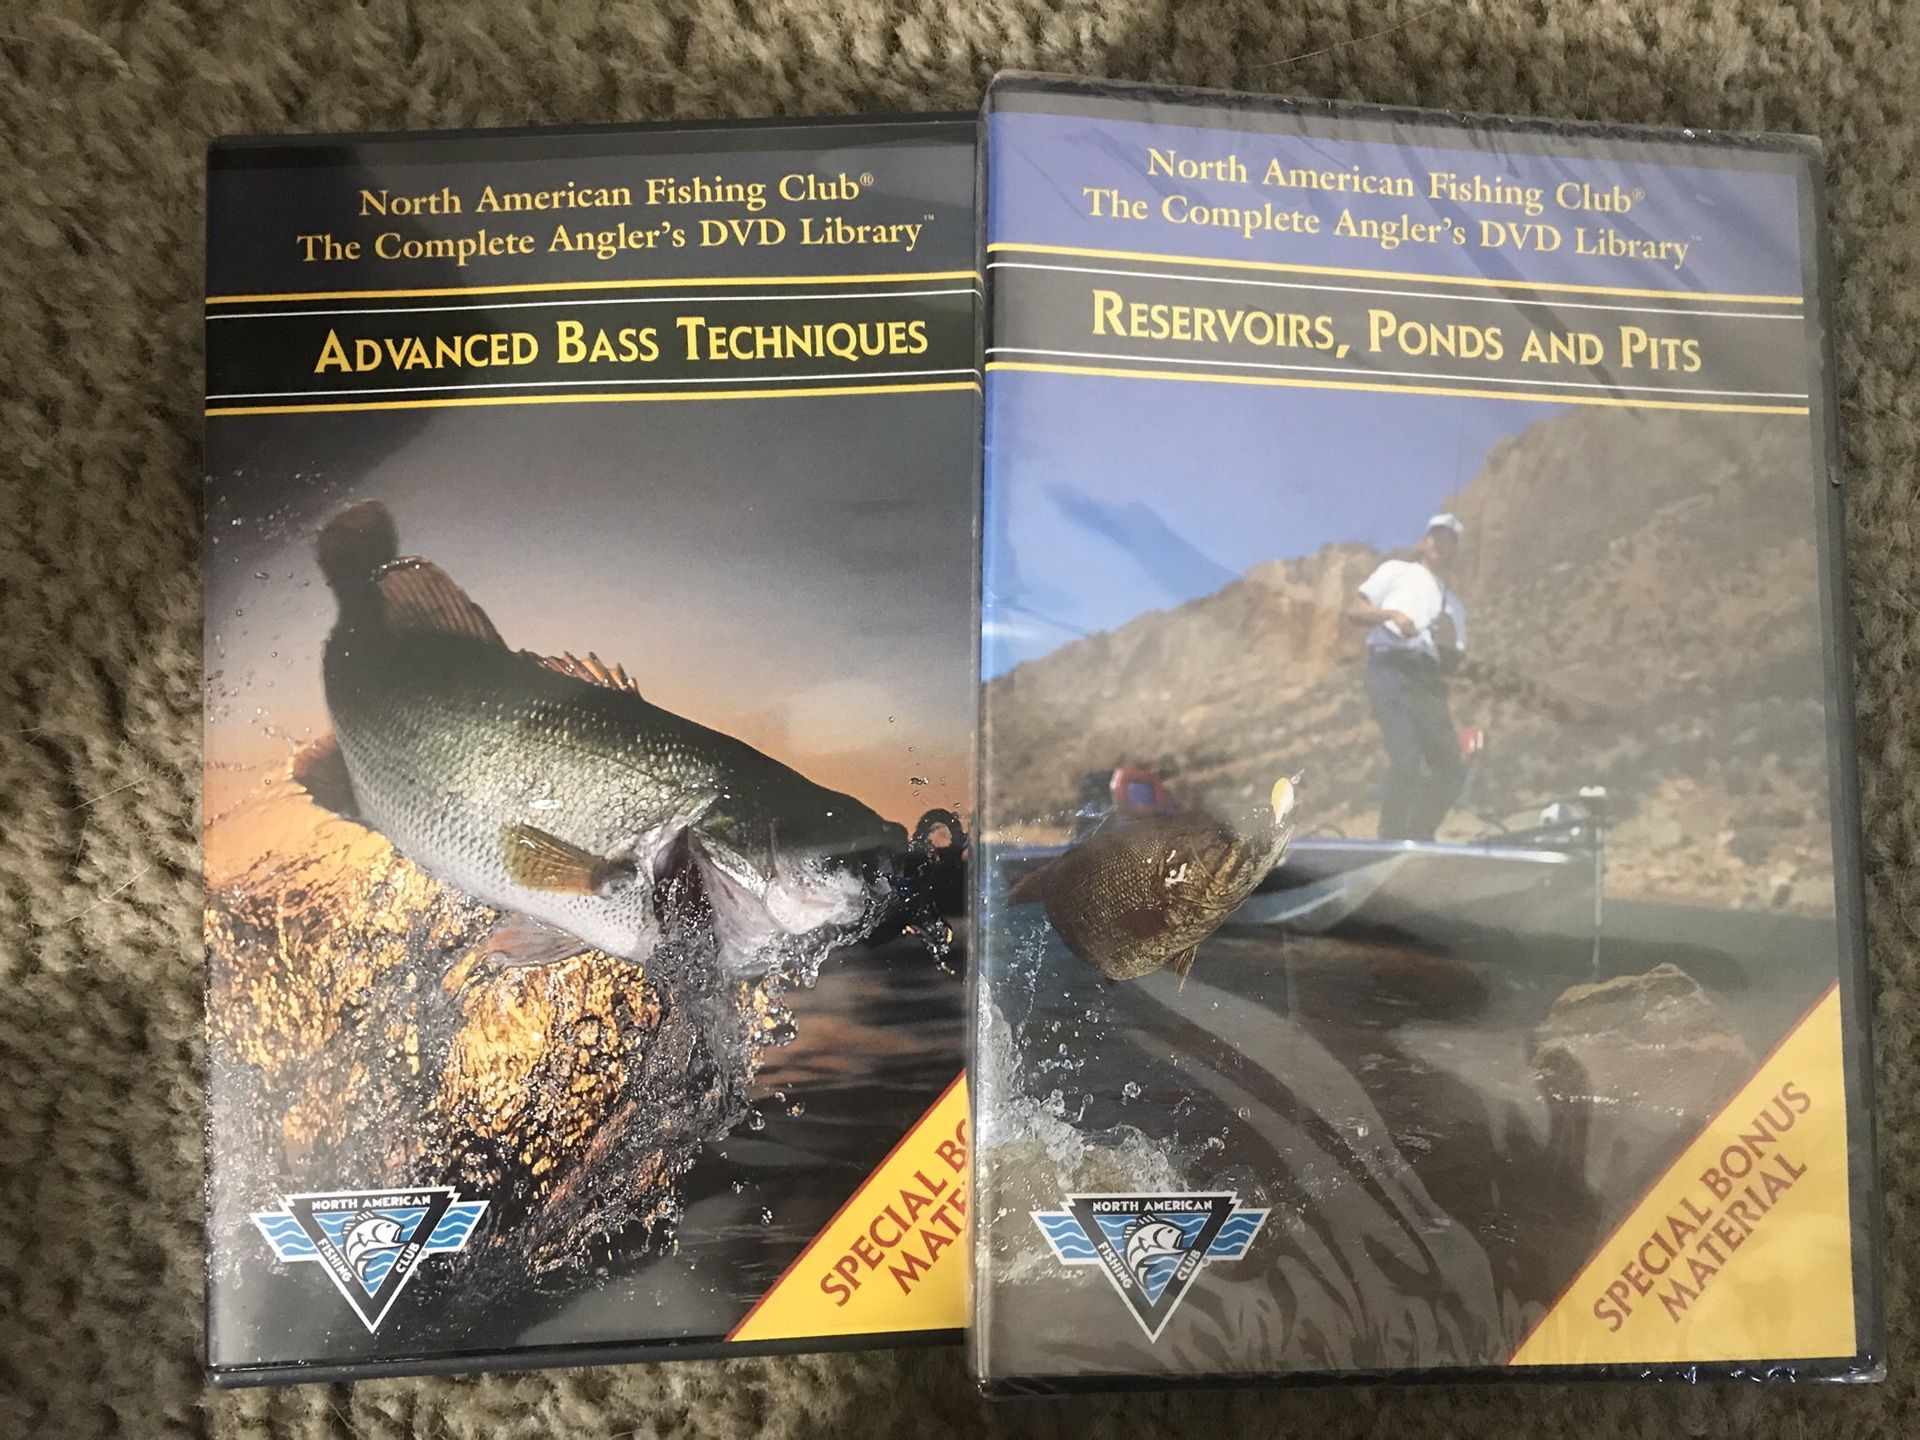 Bass Fishing Techniques & Reservoirs, Ponds & Pits DVD’s